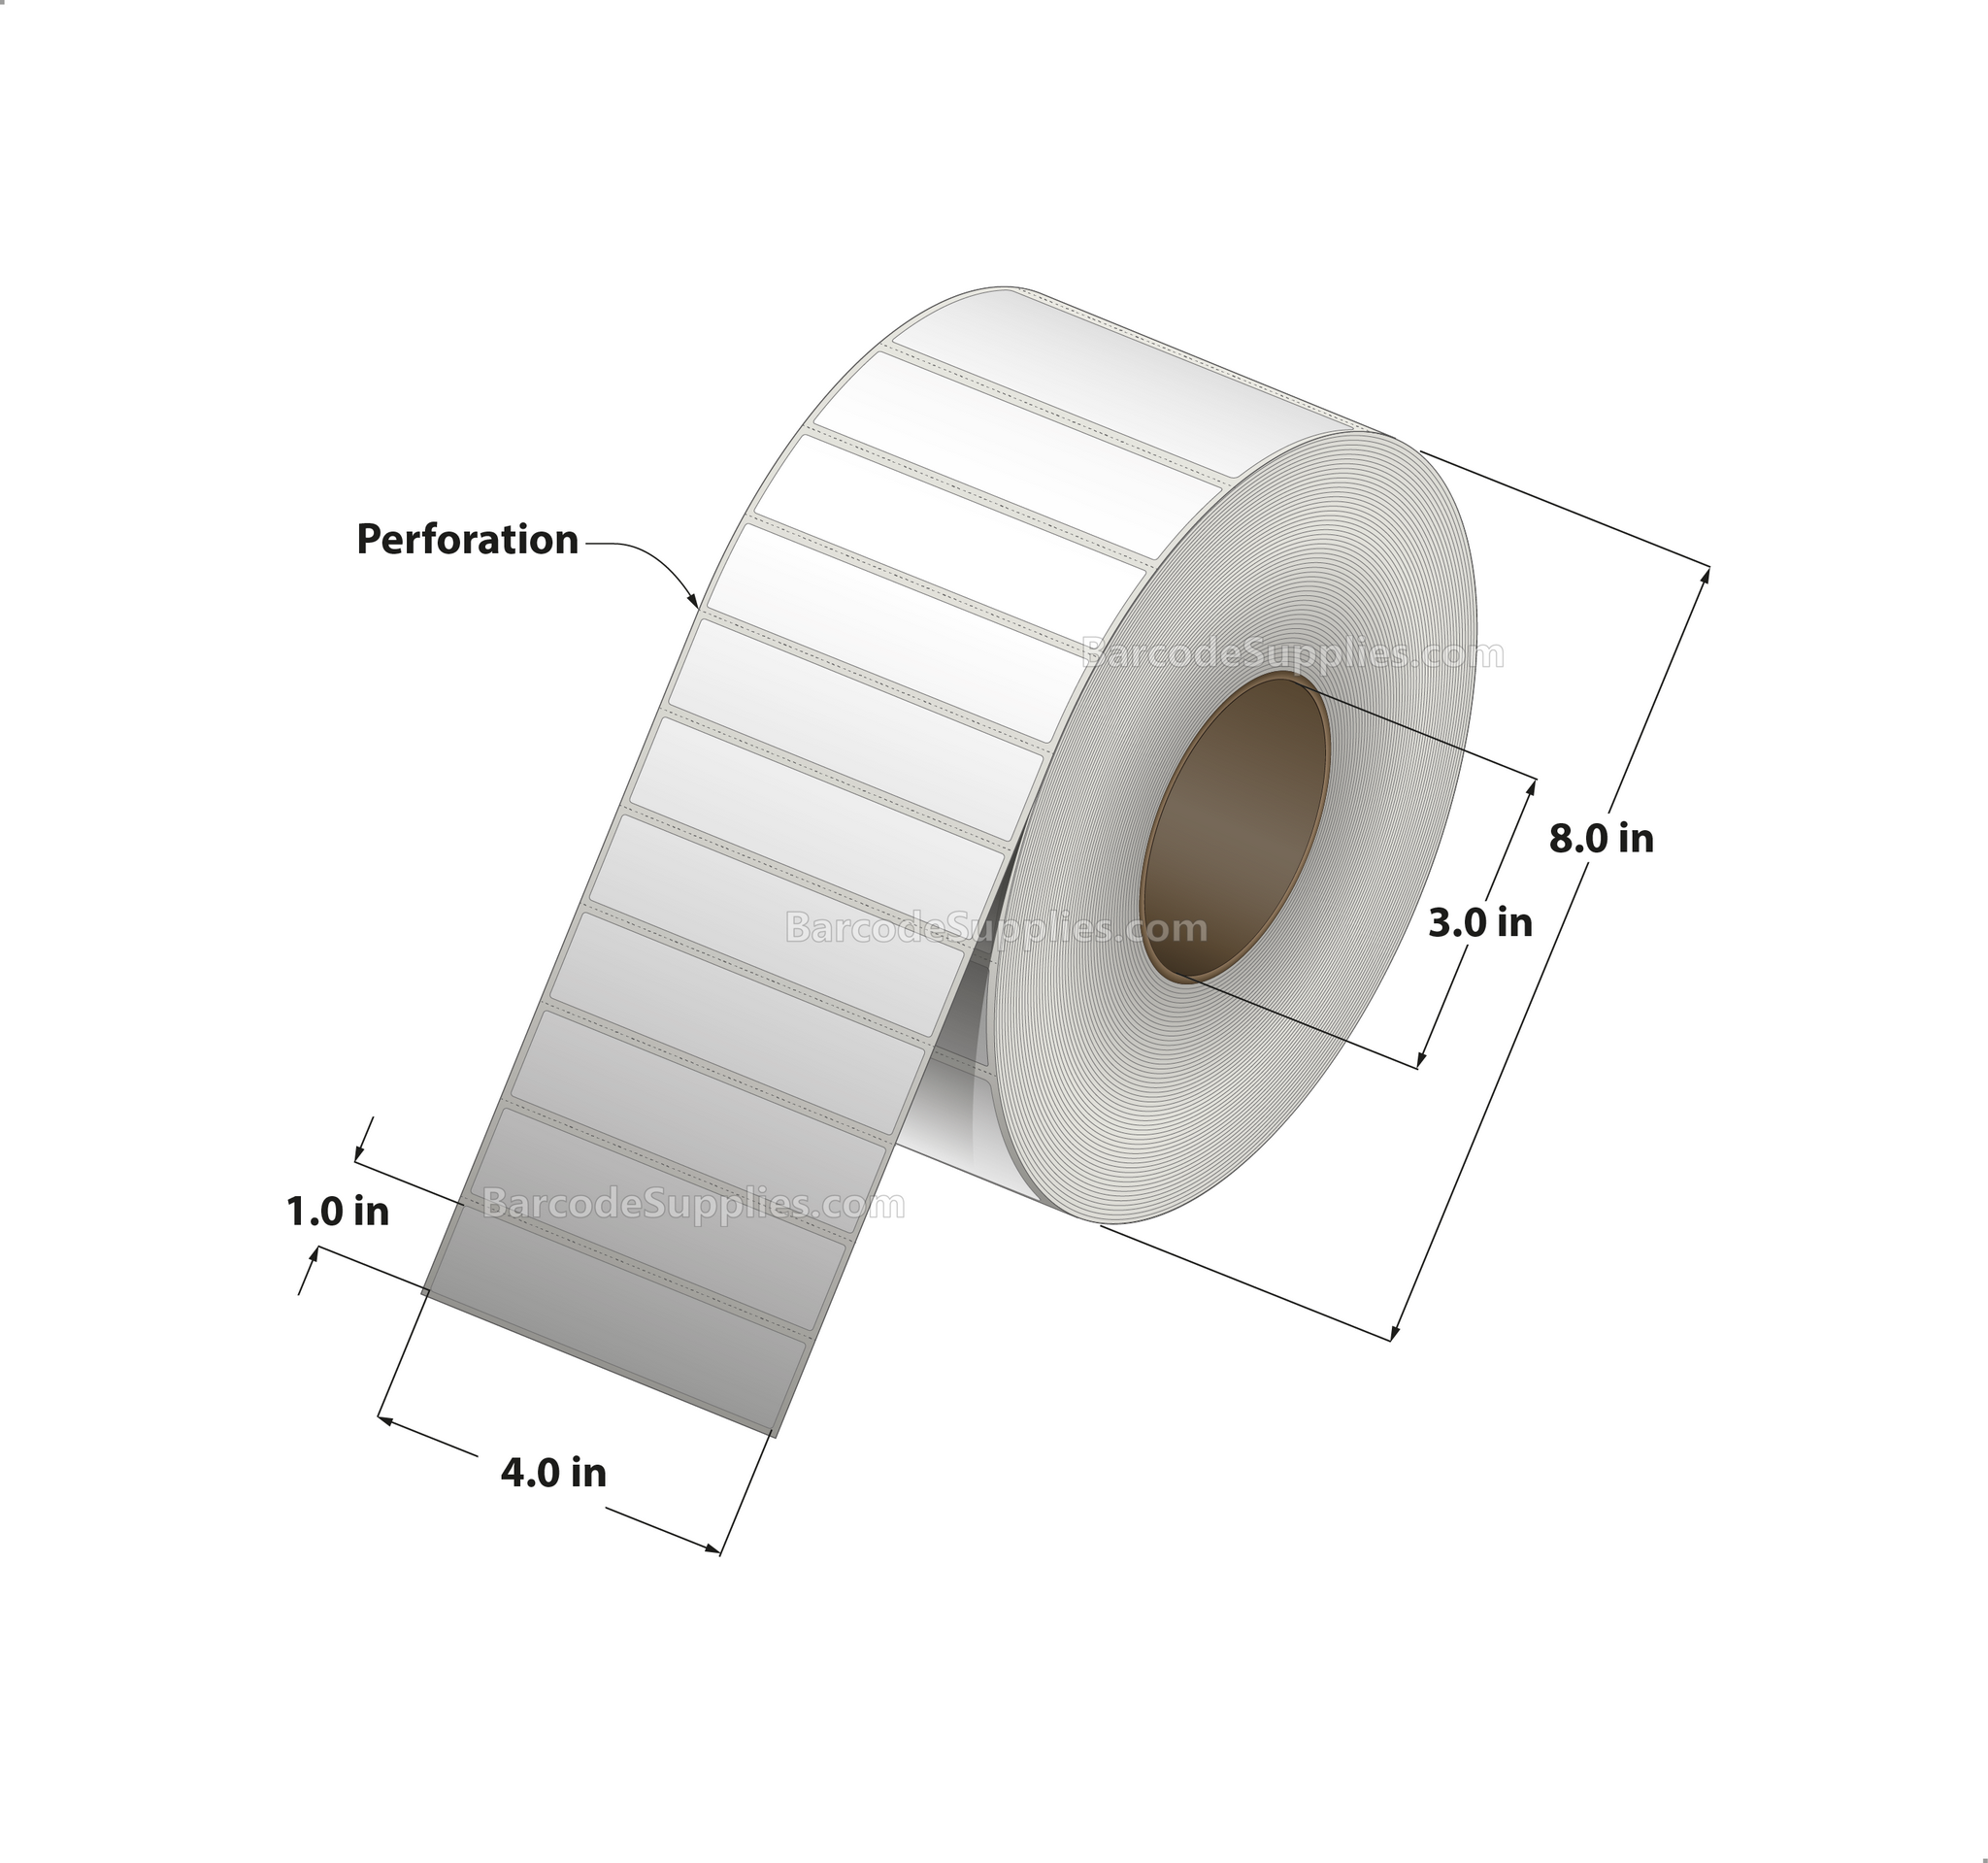 4 x 1 Thermal Transfer White Labels With Removable Adhesive - Perforated - 5500 Labels Per Roll - Carton Of 4 Rolls - 22000 Labels Total - MPN: RE-4-1-5500-3